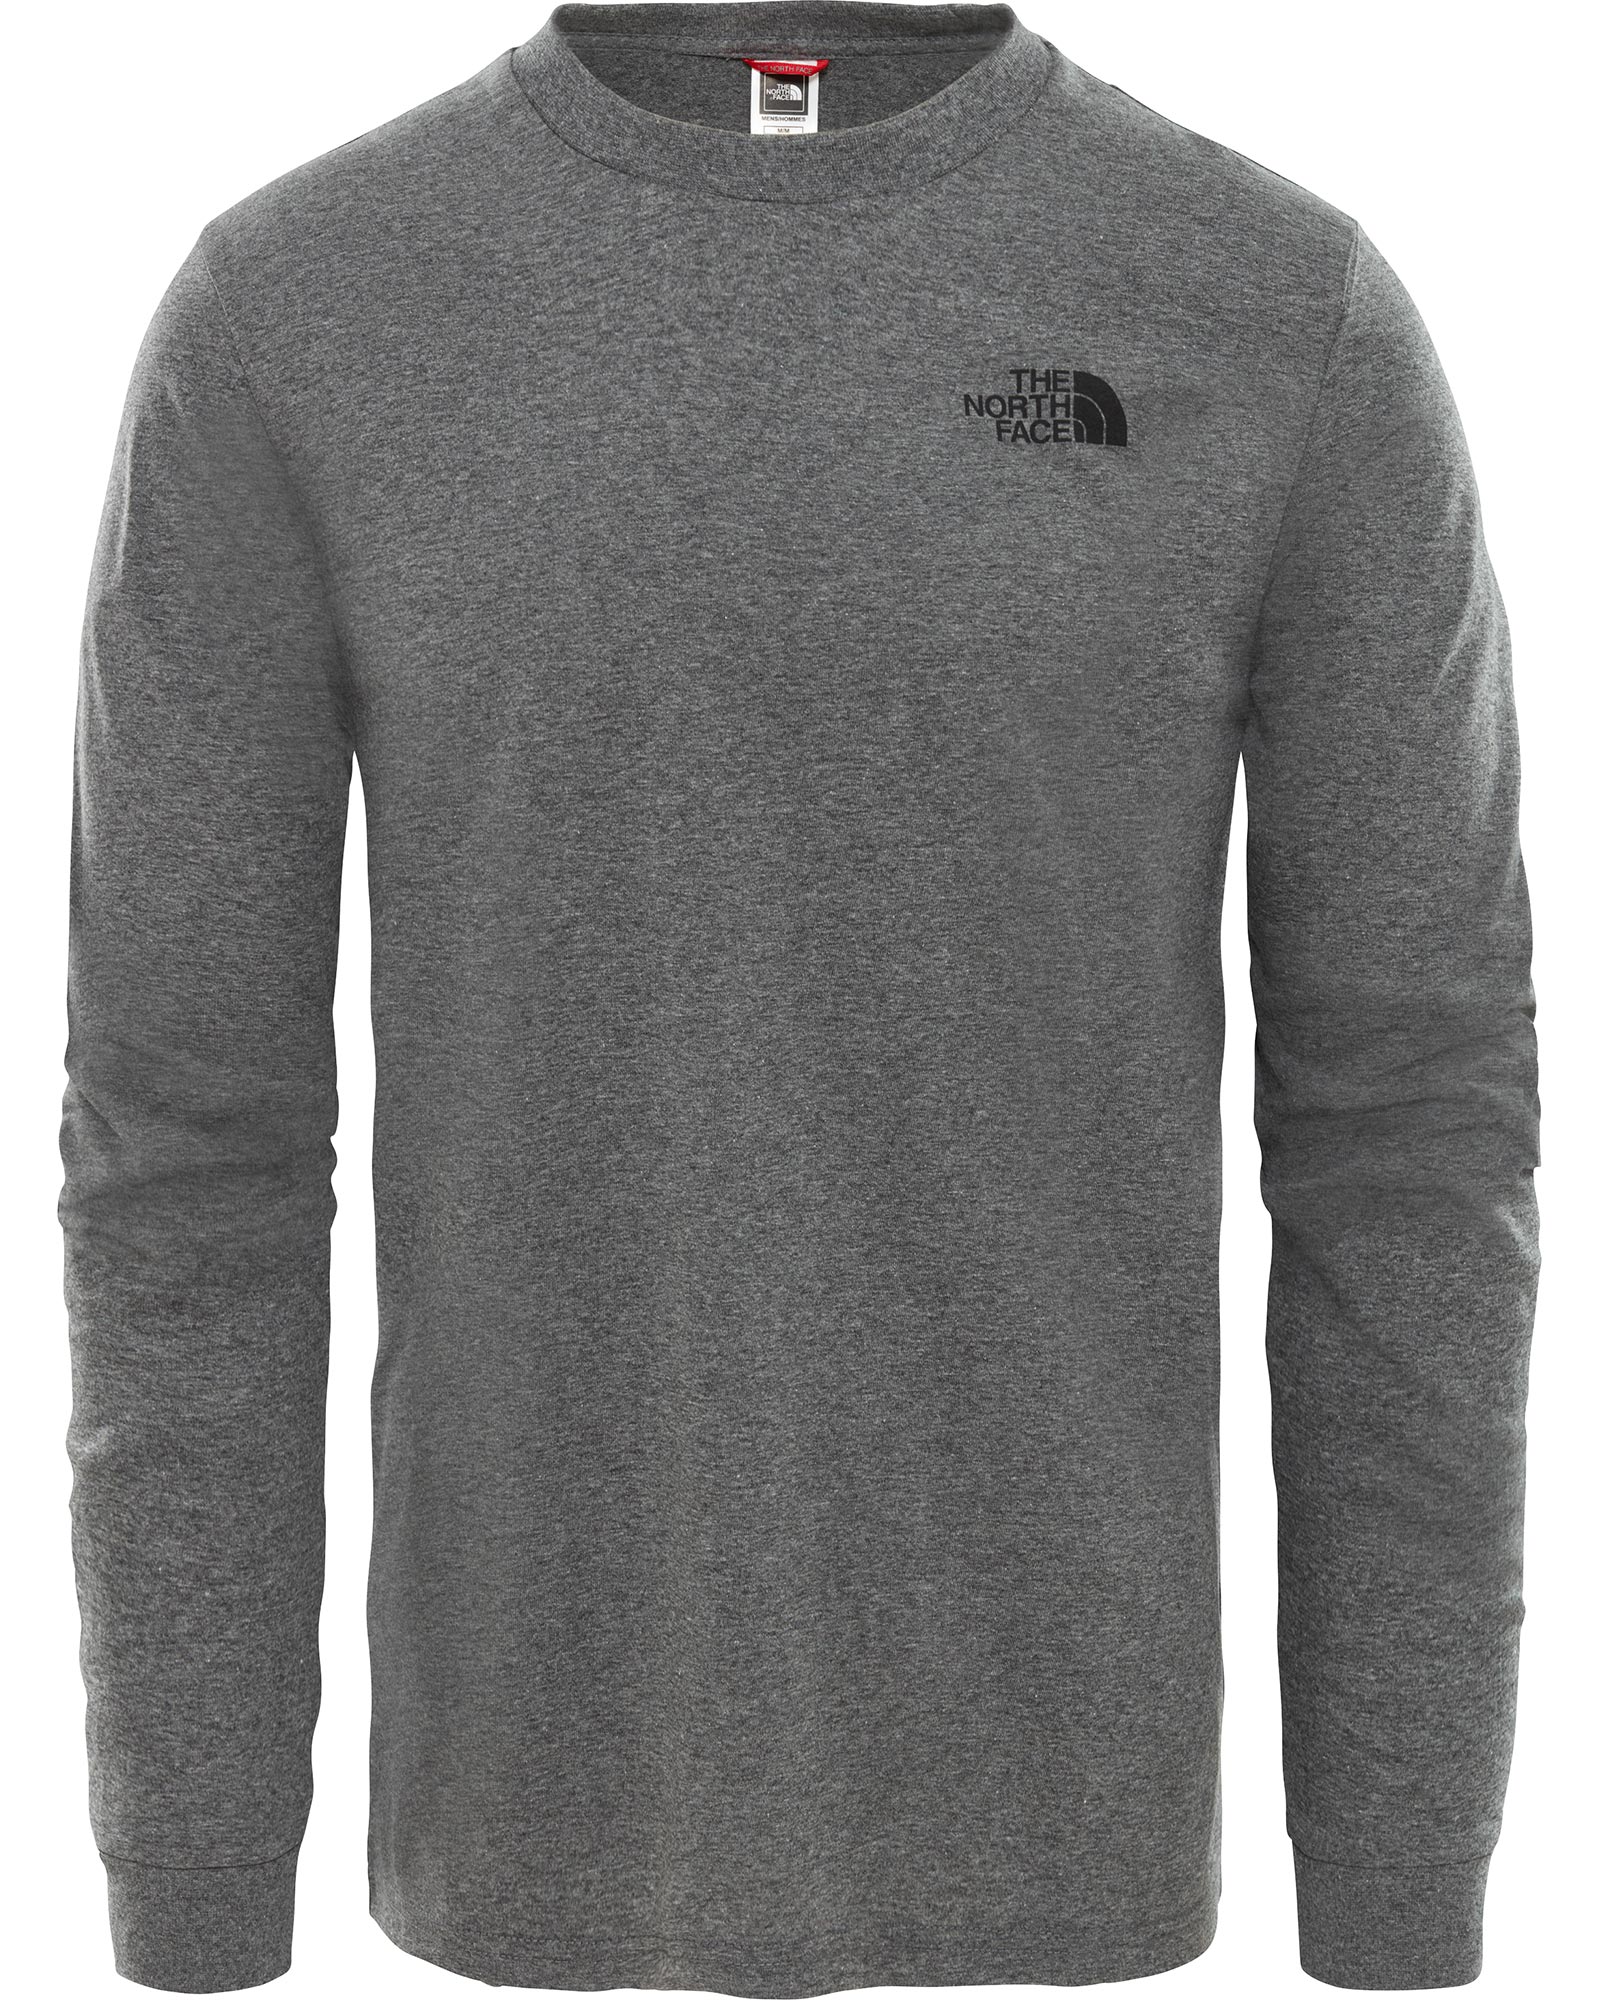 The North Face Simple Dome Men’s Long Sleeve T Shirt - TNF Medium Grey Heather L